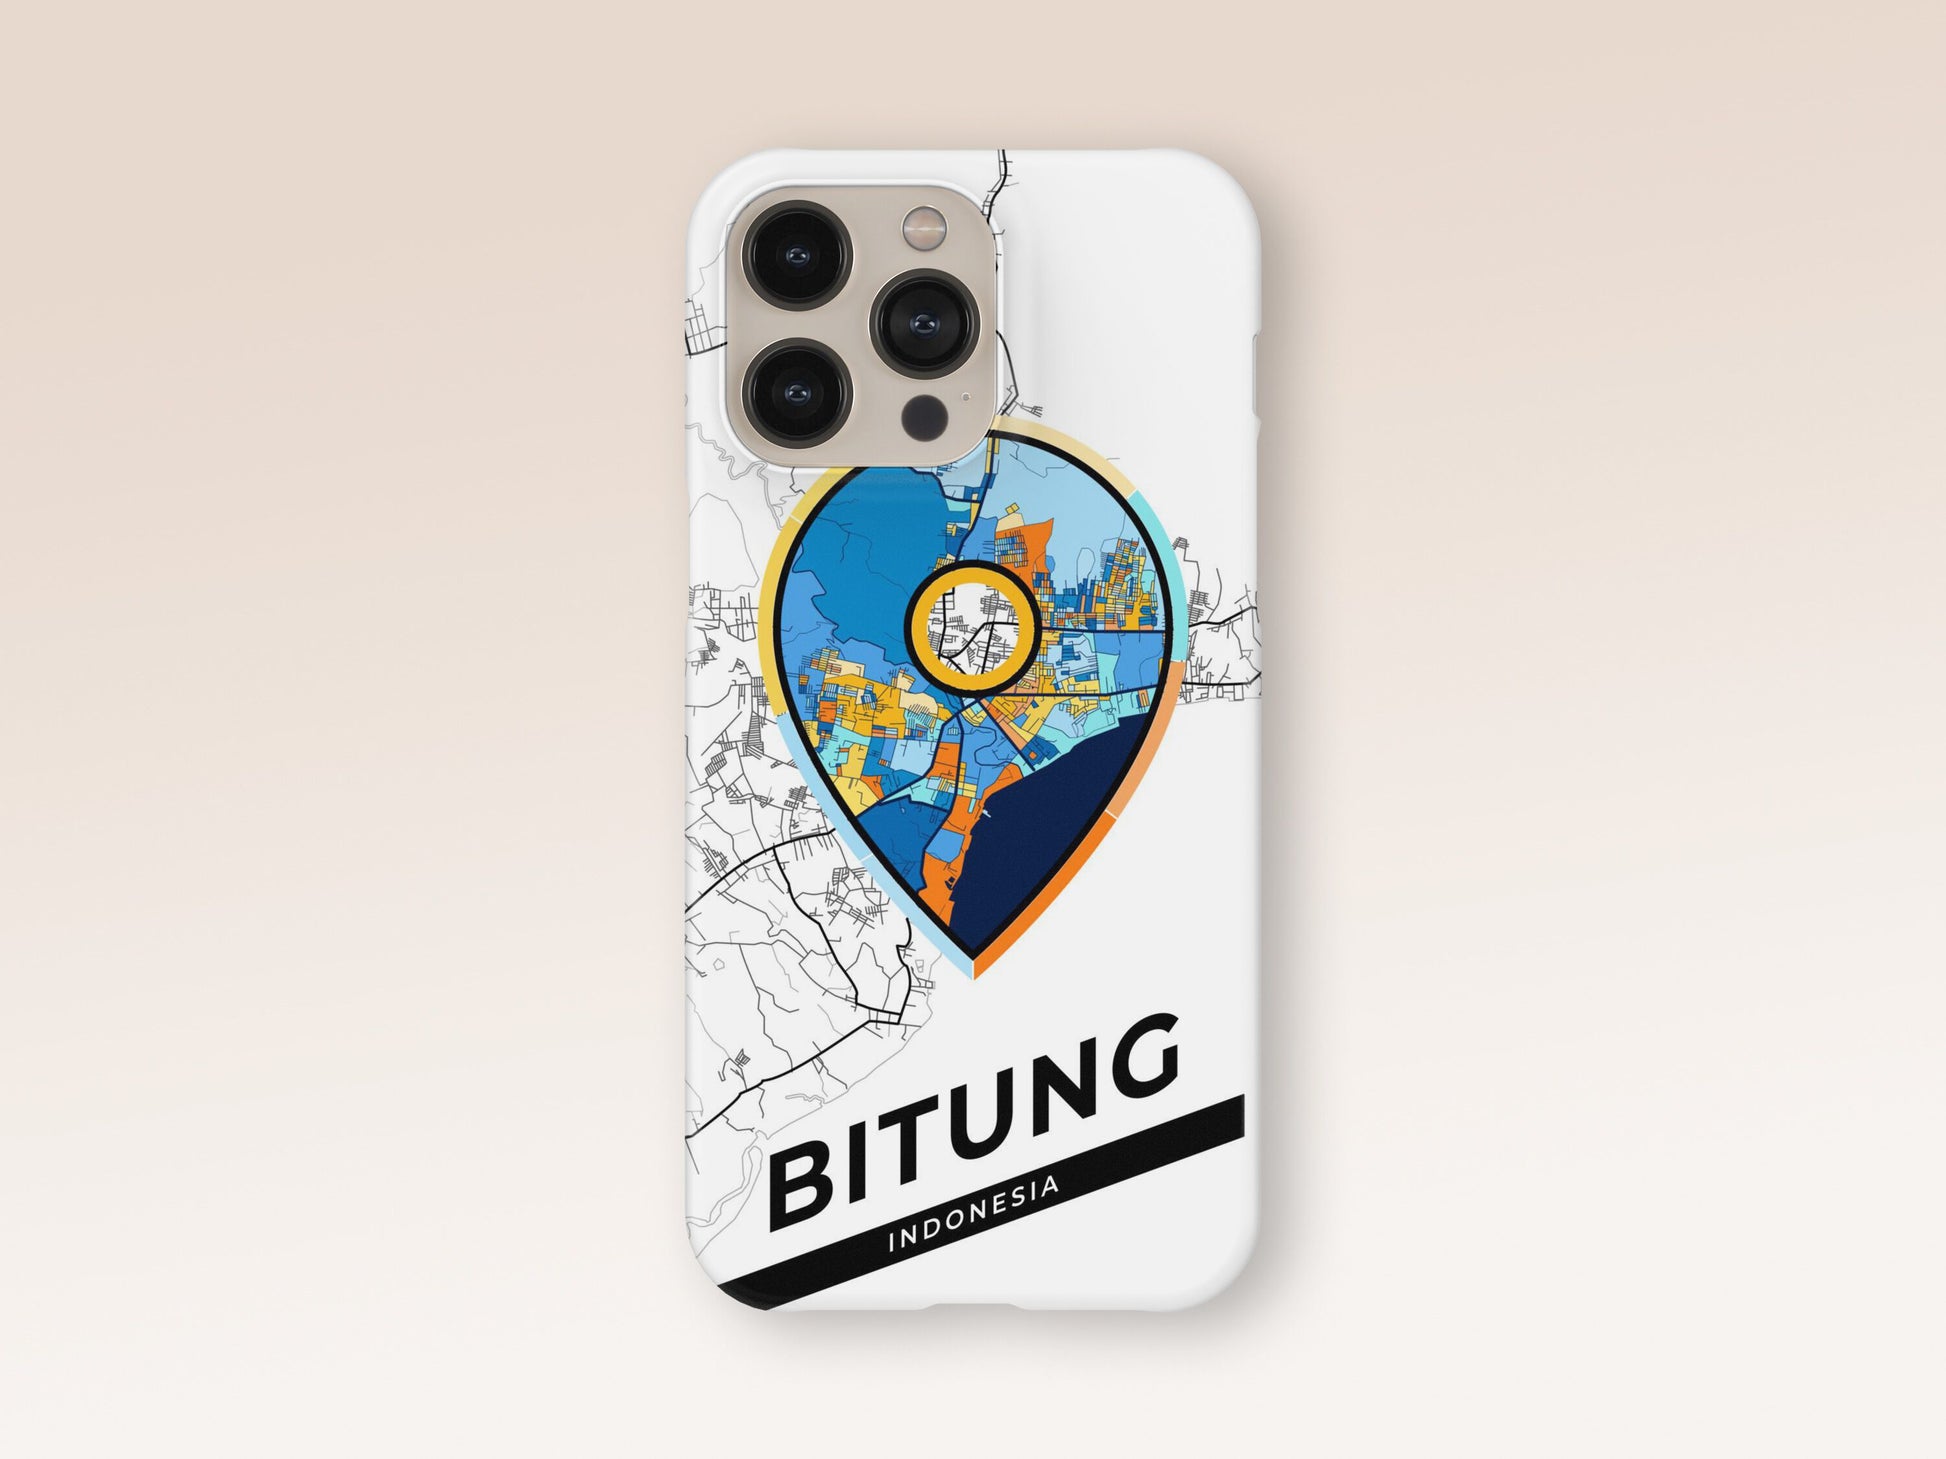 Bitung Indonesia slim phone case with colorful icon. Birthday, wedding or housewarming gift. Couple match cases. 1